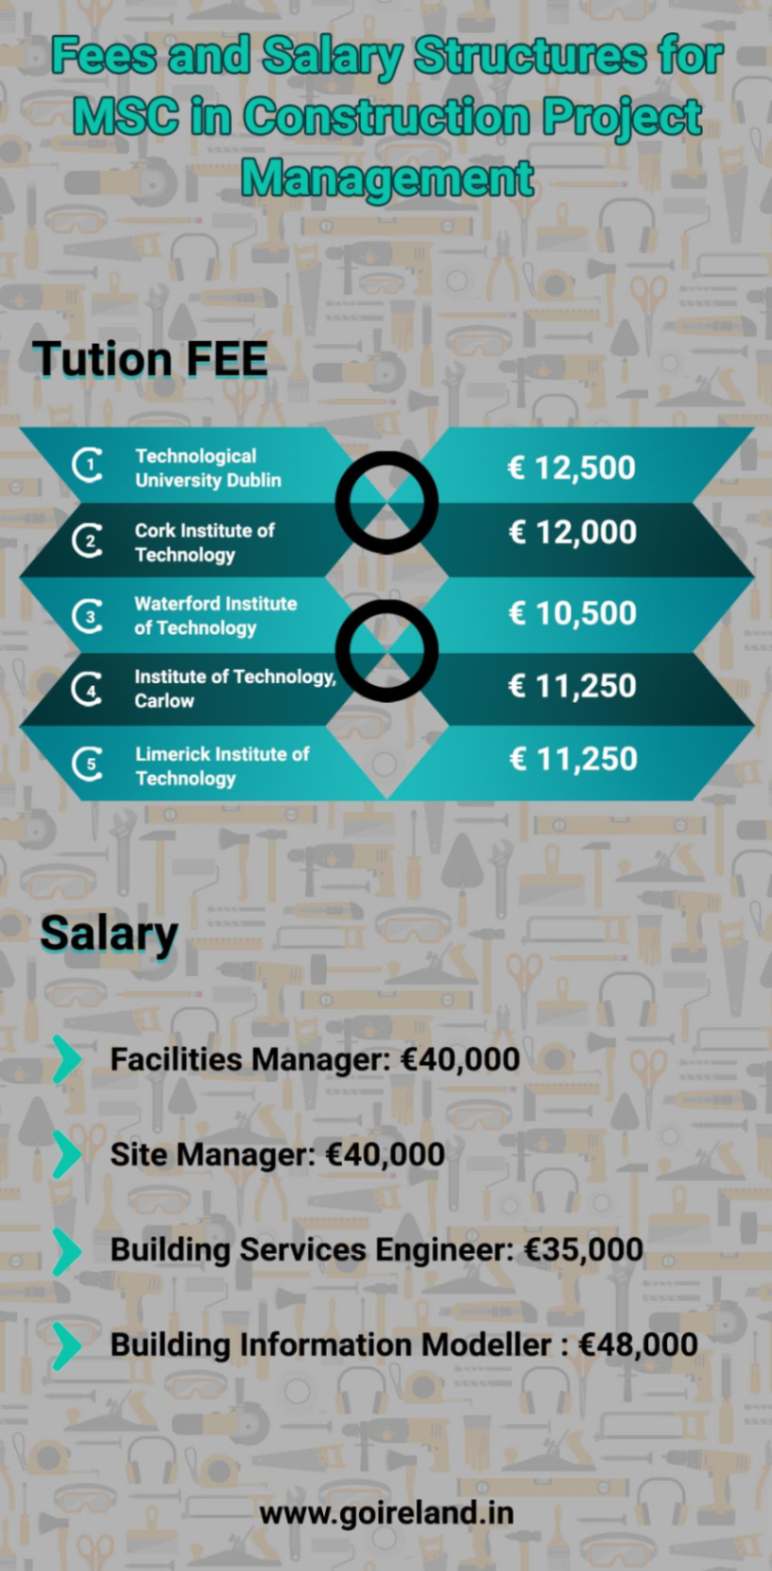 Fees and Salary Structures for MSc in Construction Project Management